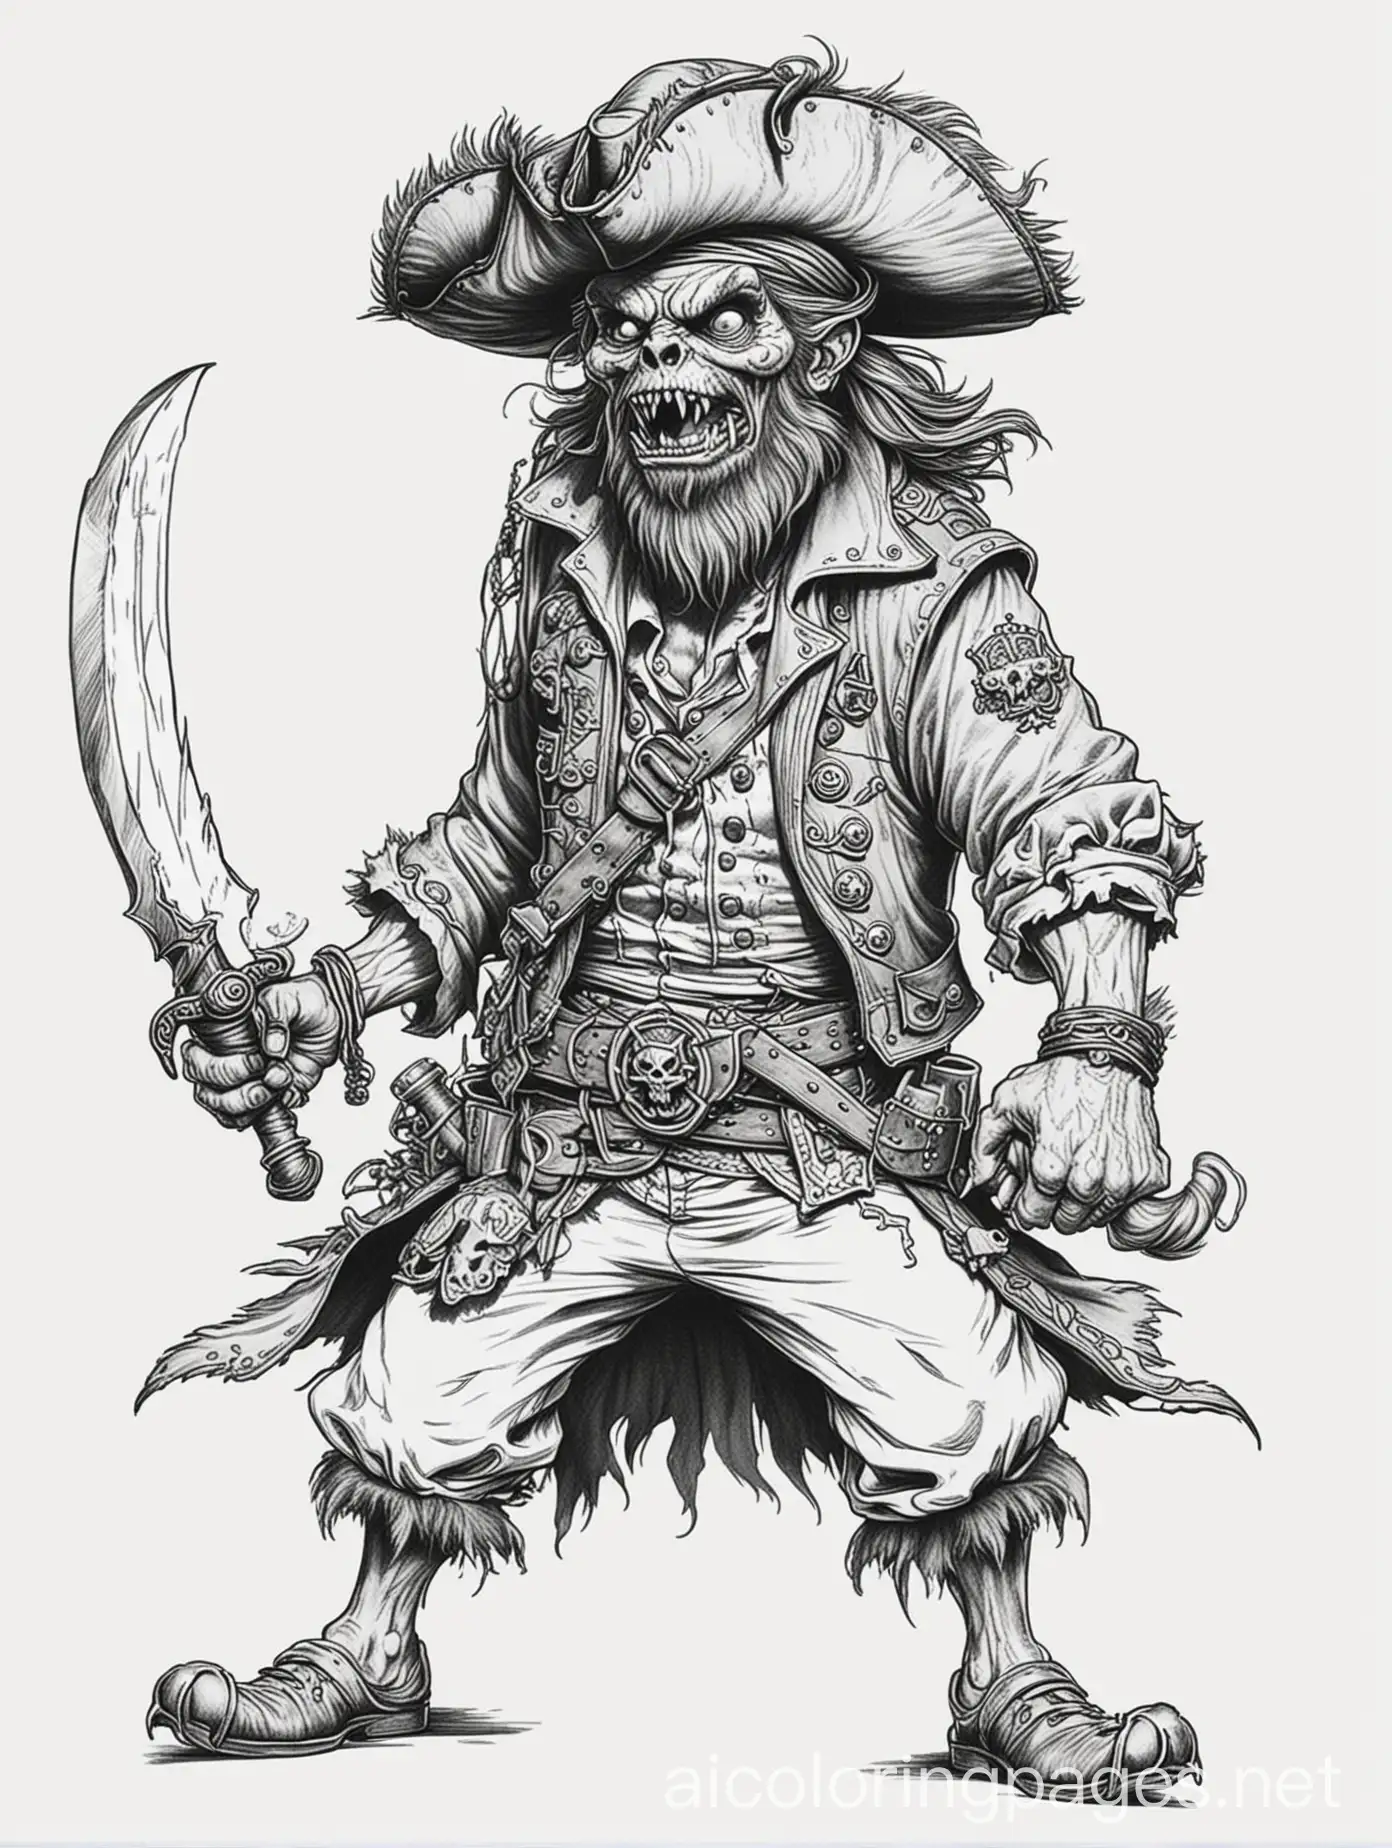 werewolf pirate fighting zombie pirate, Coloring Page, black and white, line art, white background, Simplicity, Ample White Space. The background of the coloring page is plain white to make it easy for young children to color within the lines. The outlines of all the subjects are easy to distinguish, making it simple for kids to color without too much difficulty